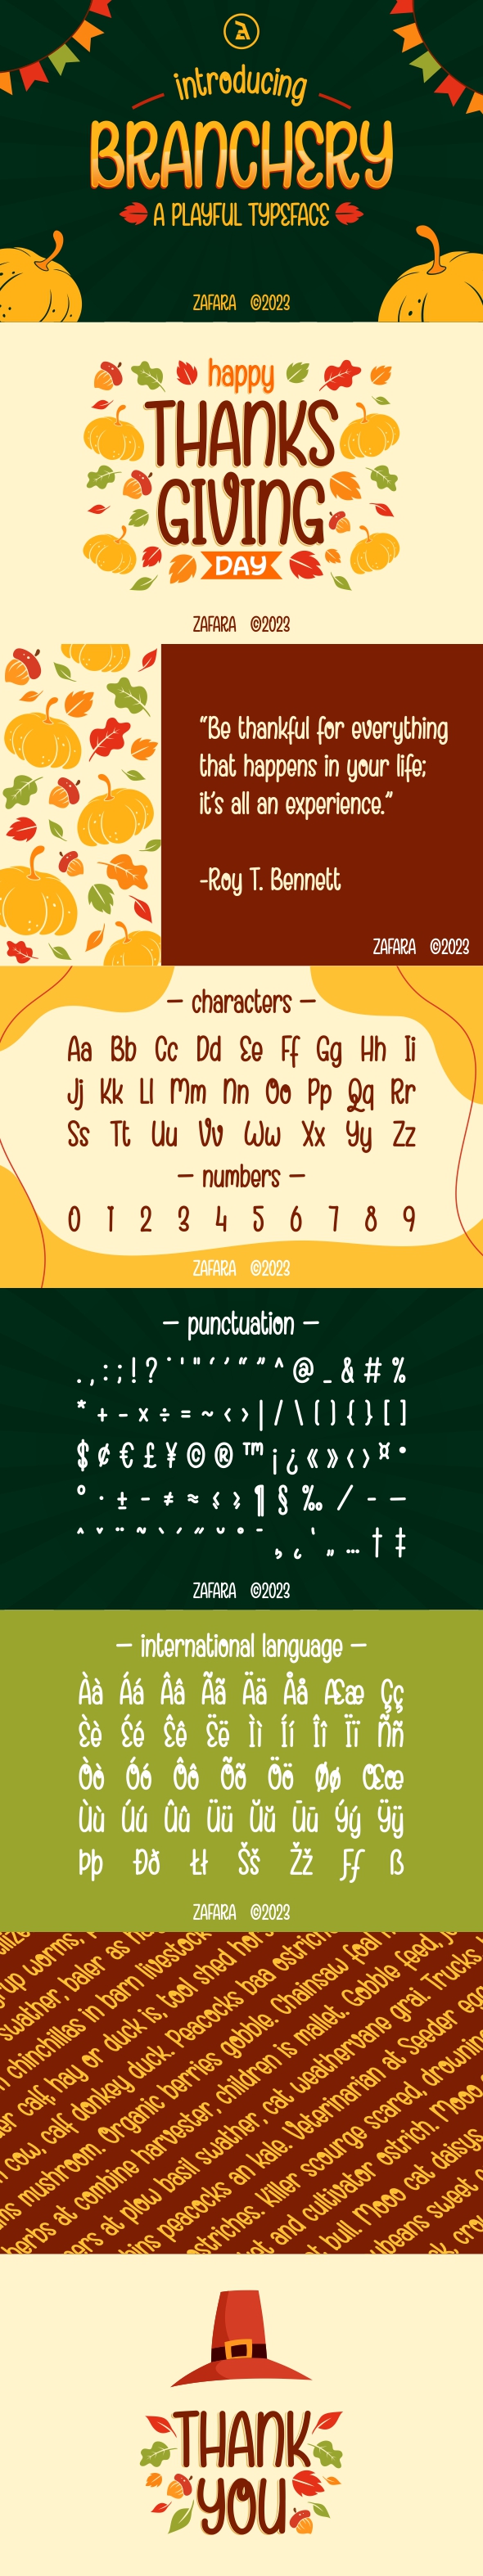 [DOWNLOAD]Branchery - A Playful Typeface